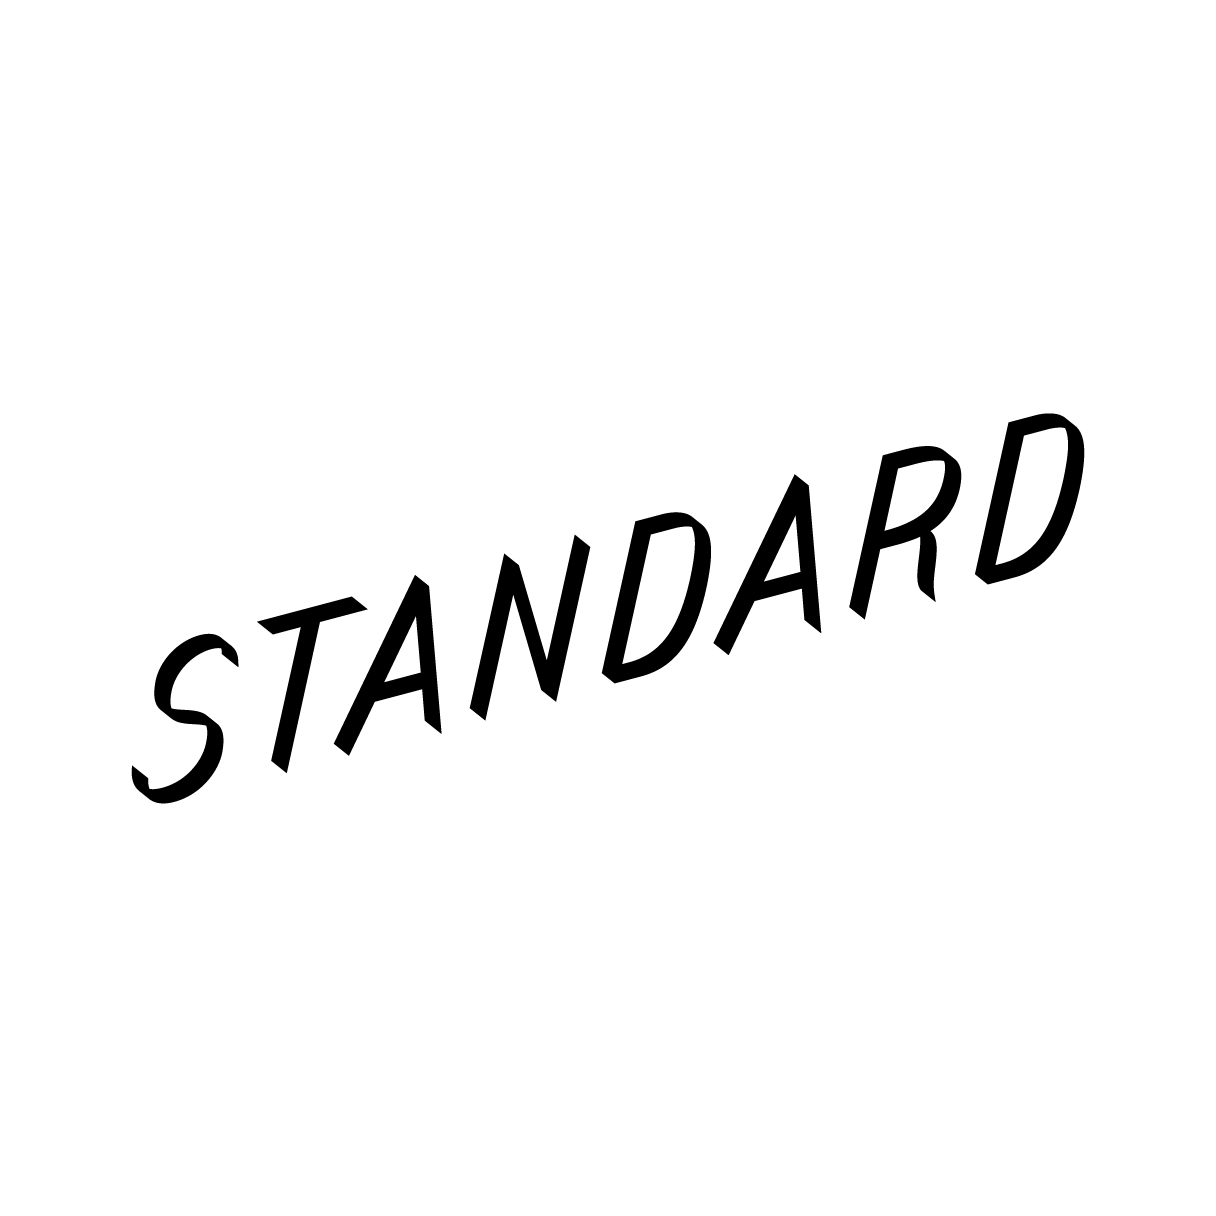 Standard Goods and Services